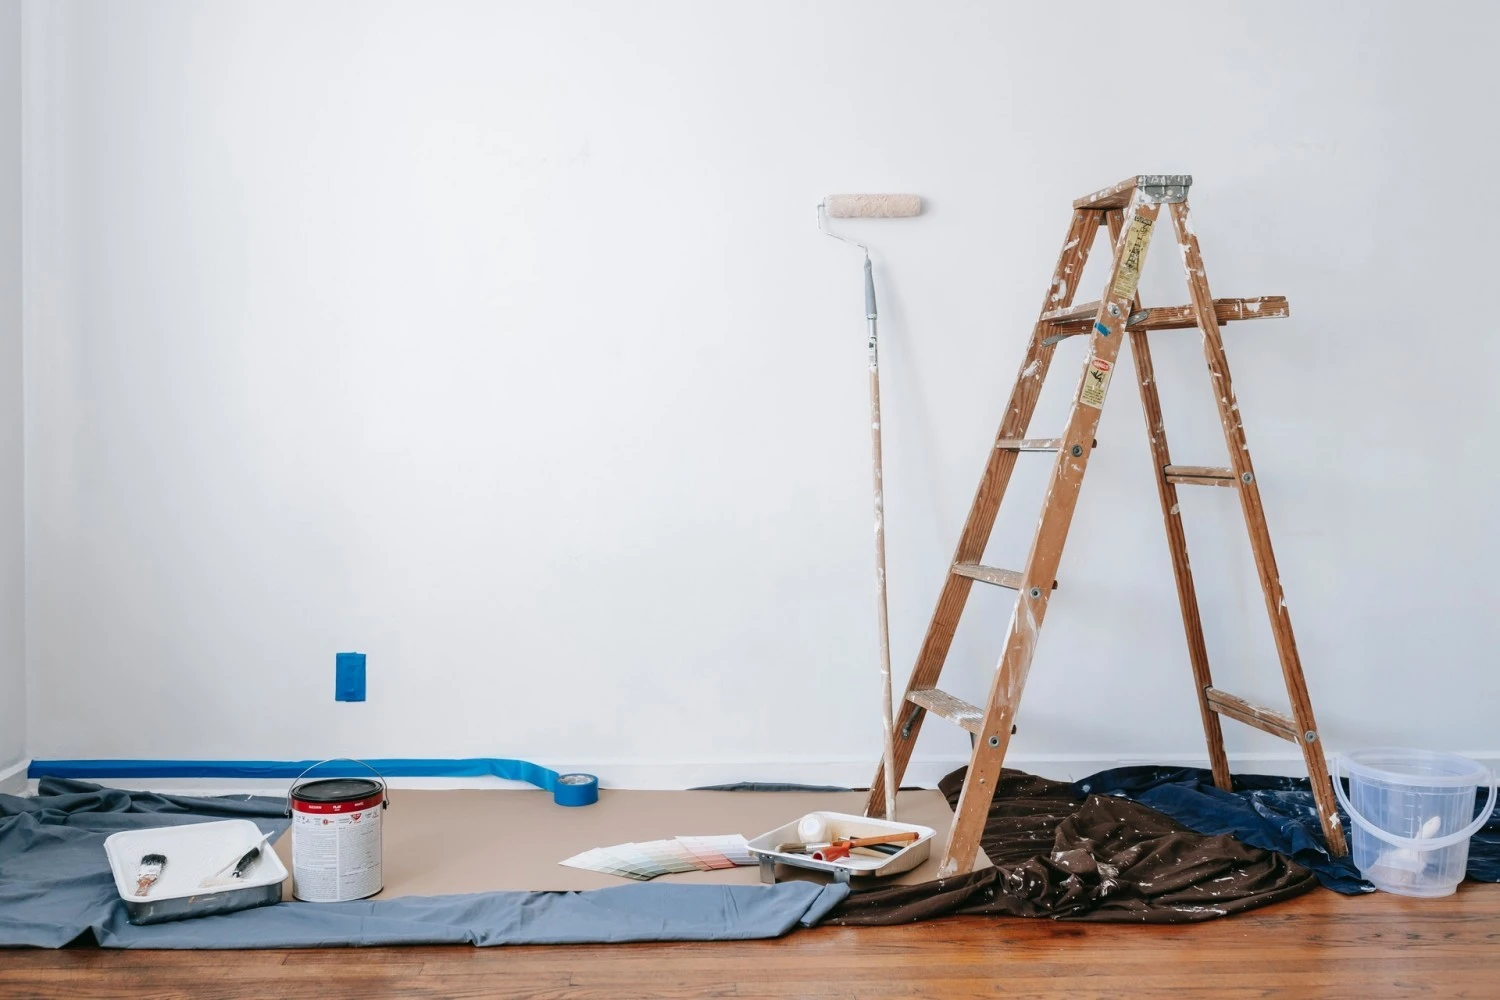 6 Home Improvements to Consider Before Moving to Your New Home